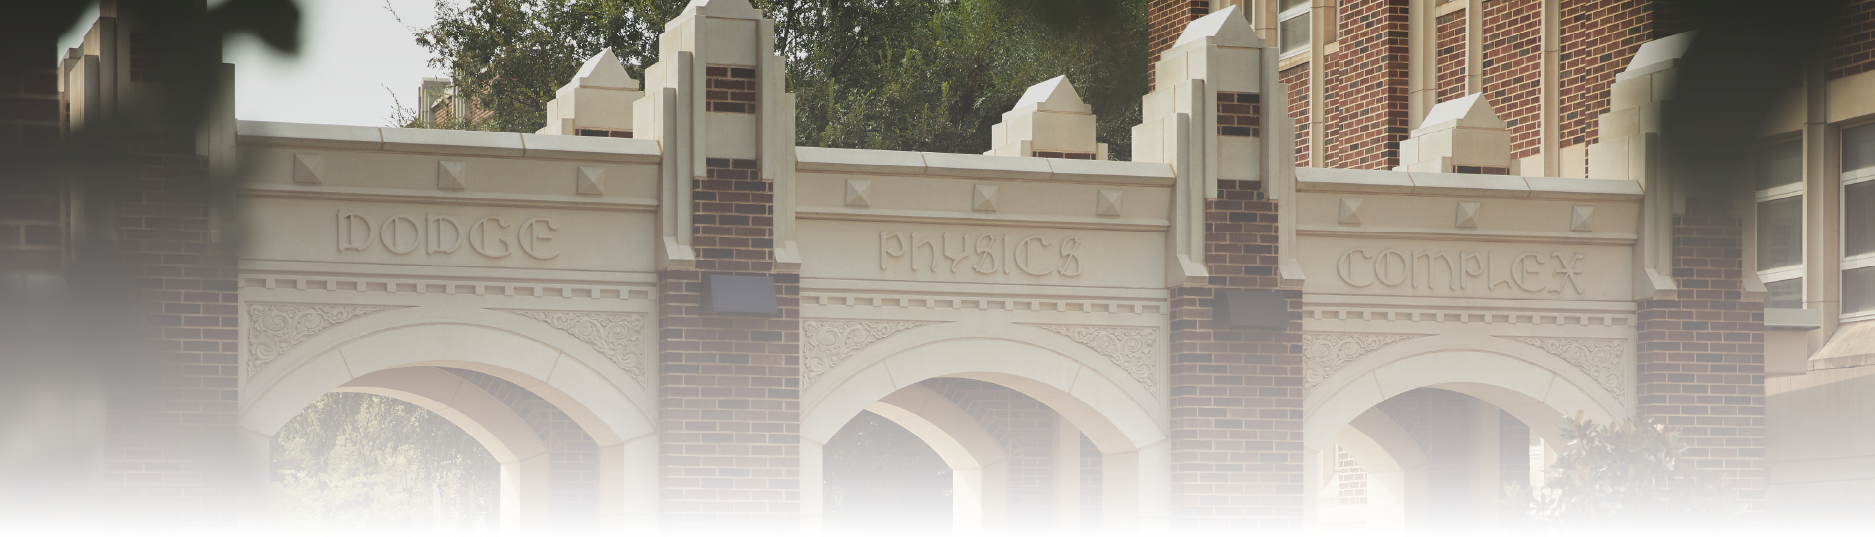 Image of the arches connecting the old and new physics buildings.